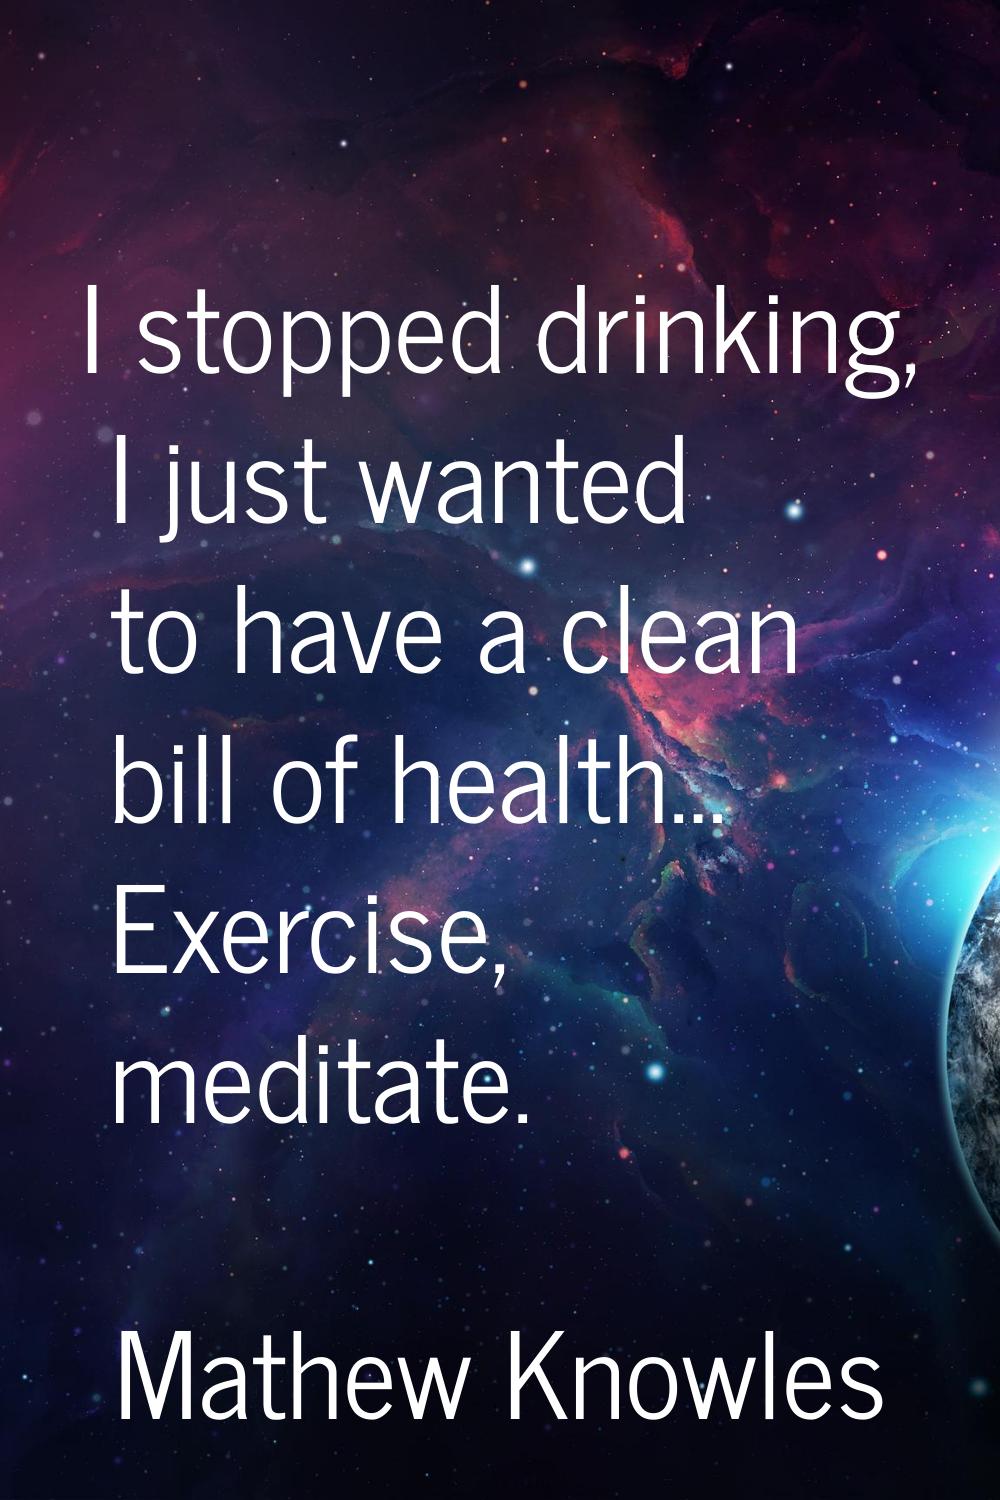 I stopped drinking, I just wanted to have a clean bill of health… Exercise, meditate.